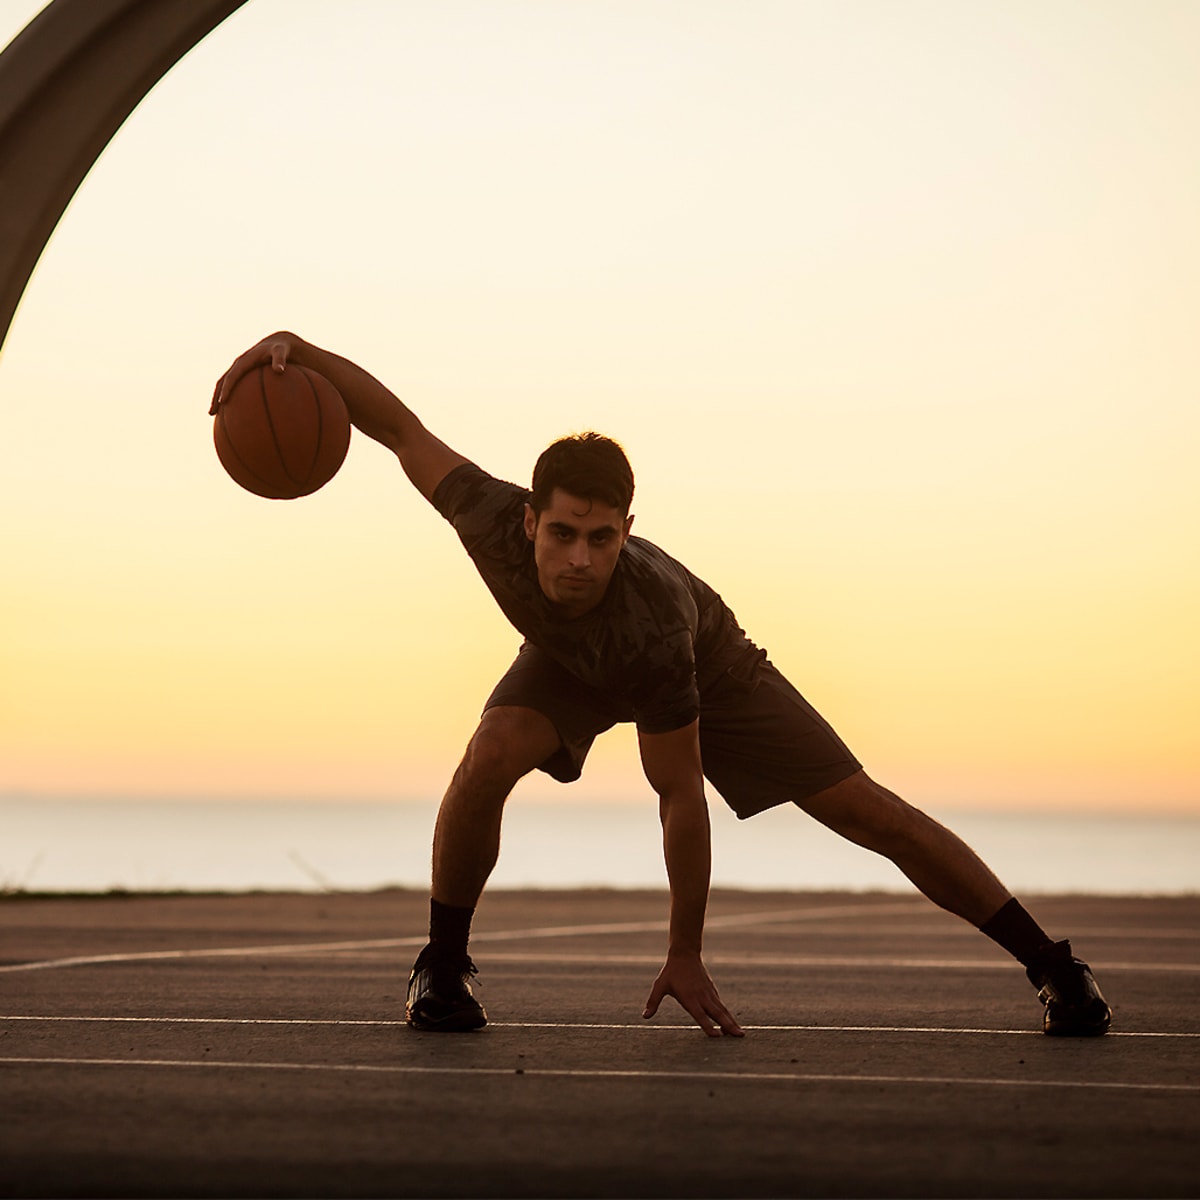 How to become a better basketball player